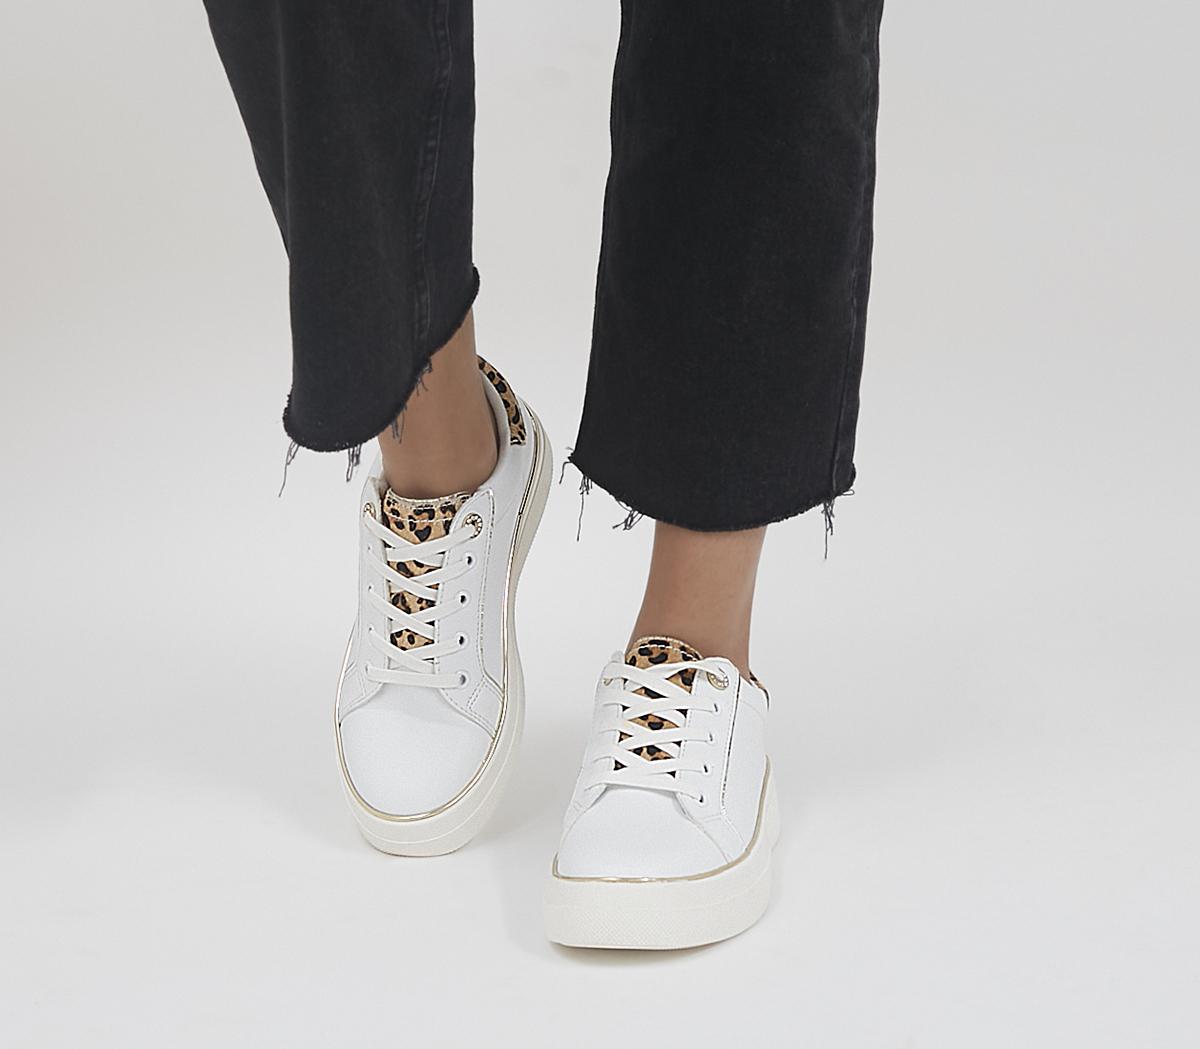 OfficeFaded Flatform Lace Up TrainersWhite Leopard Mix